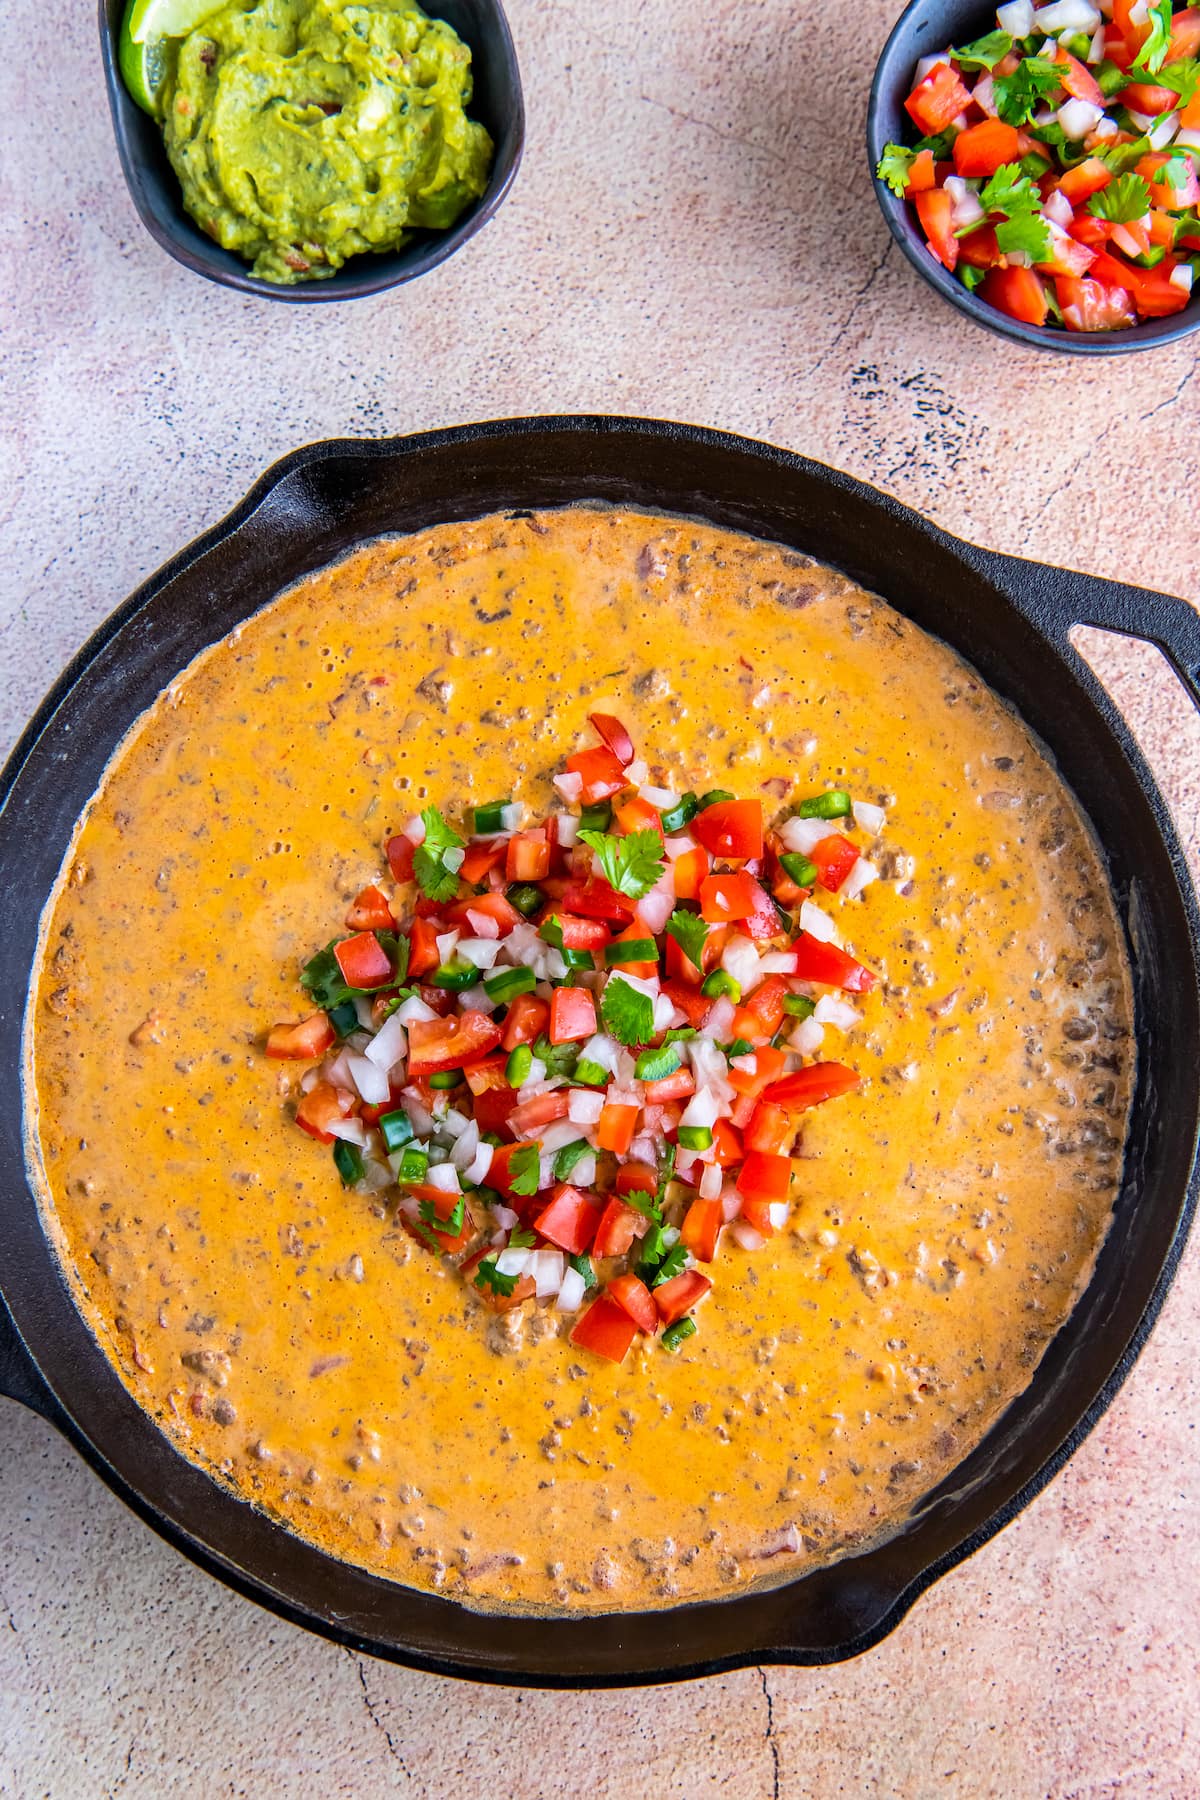 chili con queso in a cast iron skillet with garnishes of chopped tomatoes, peppers, and onions